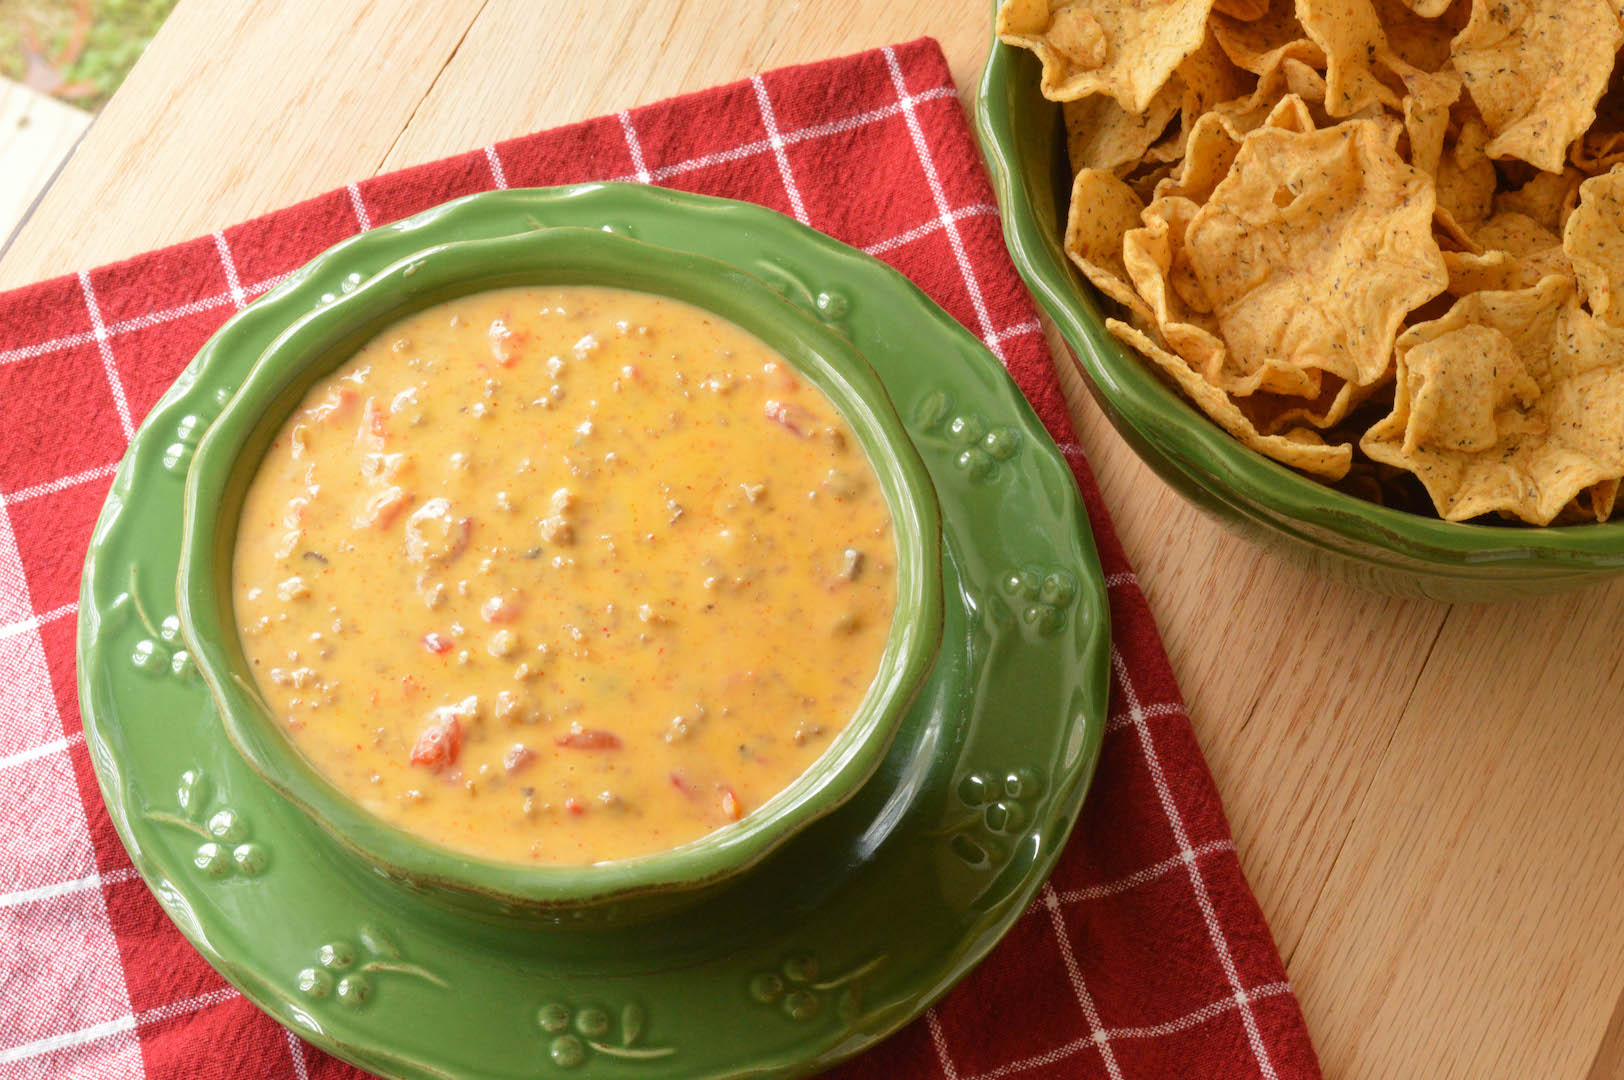 Crockpot Queso Cheese Dip Recipe - The Cookie Rookie®